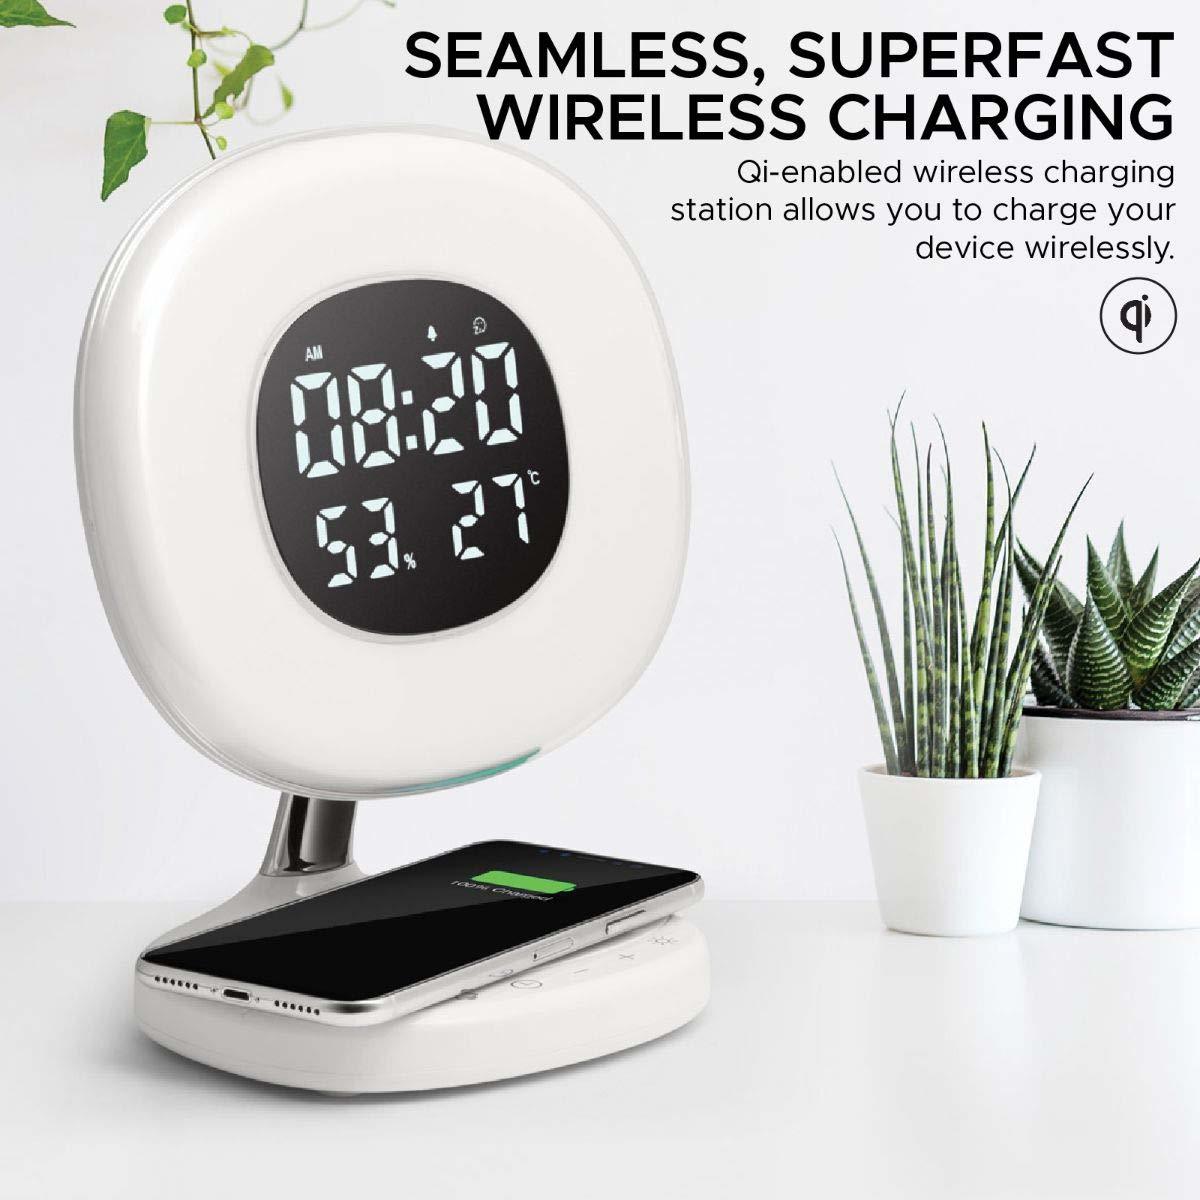 Promate AuraRise Digital Alarm Clock and Wireless Charging Station